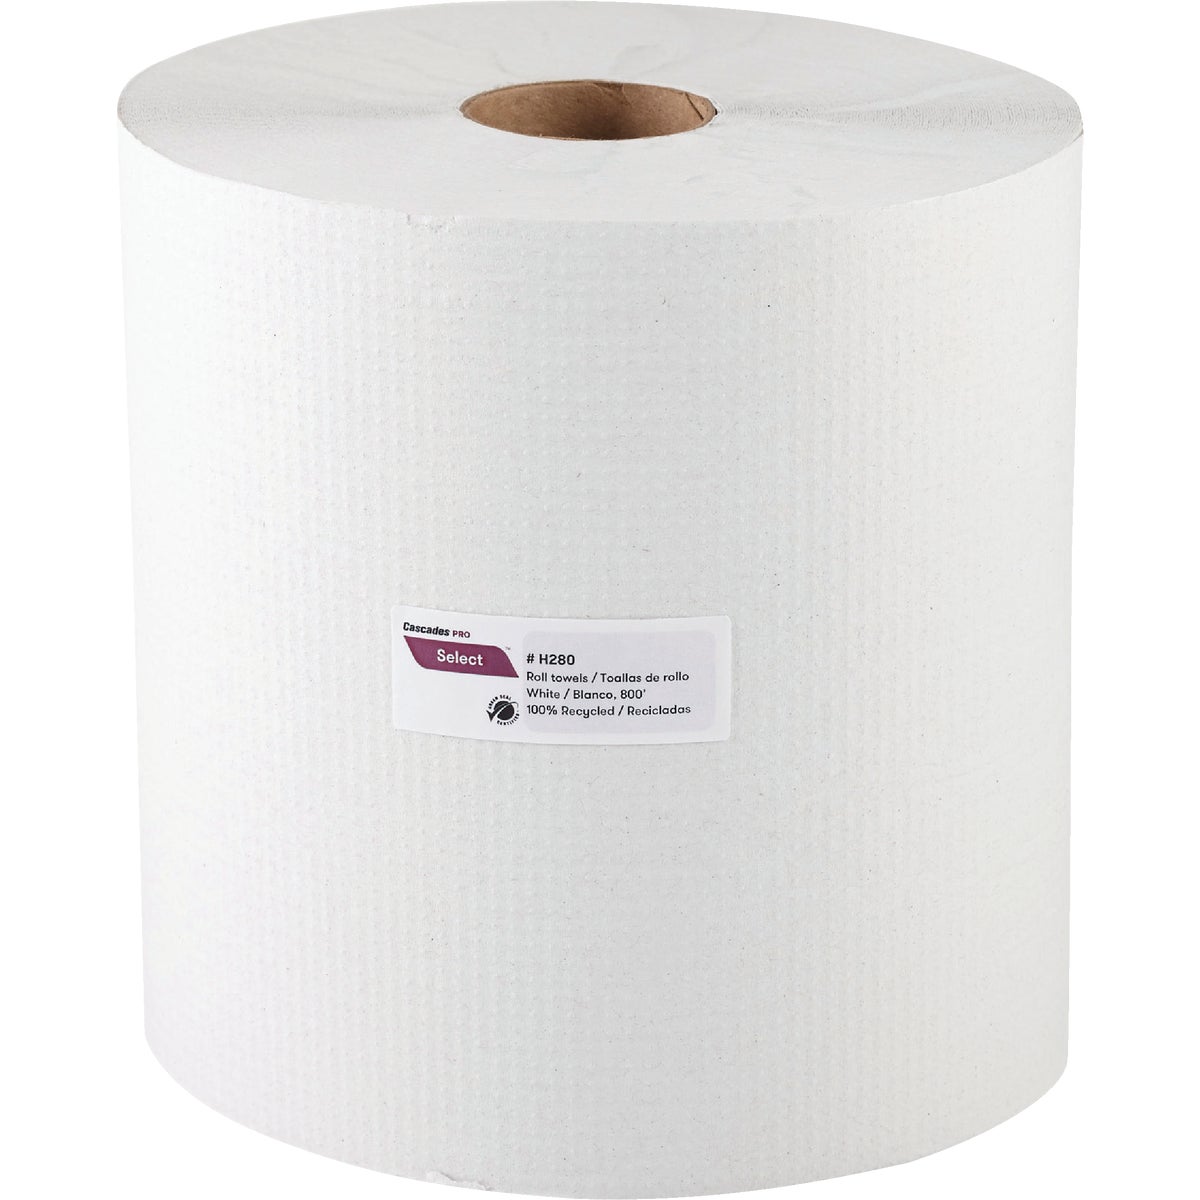 Cascades Pro Select White Hard Roll Towel (6-Count)